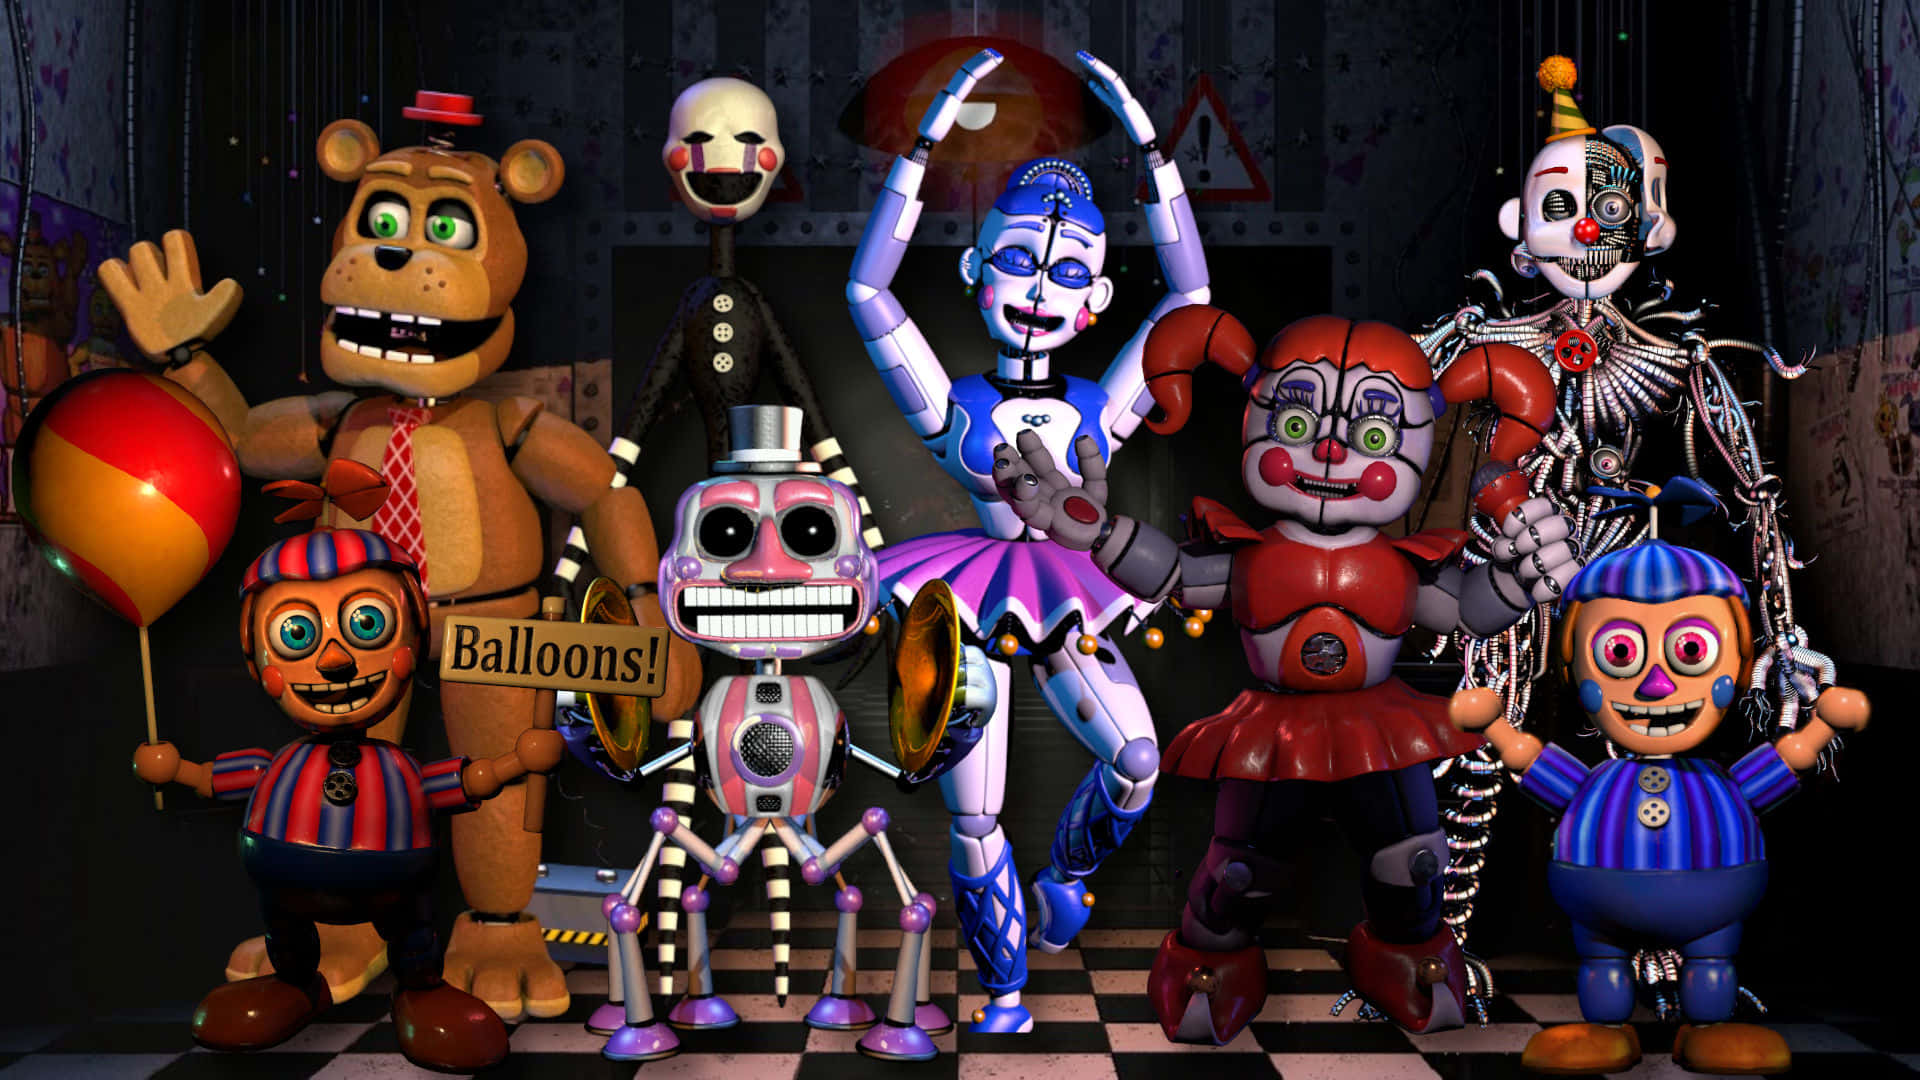 Funtime Chica Fan Casting for Five Nights: Sister Location